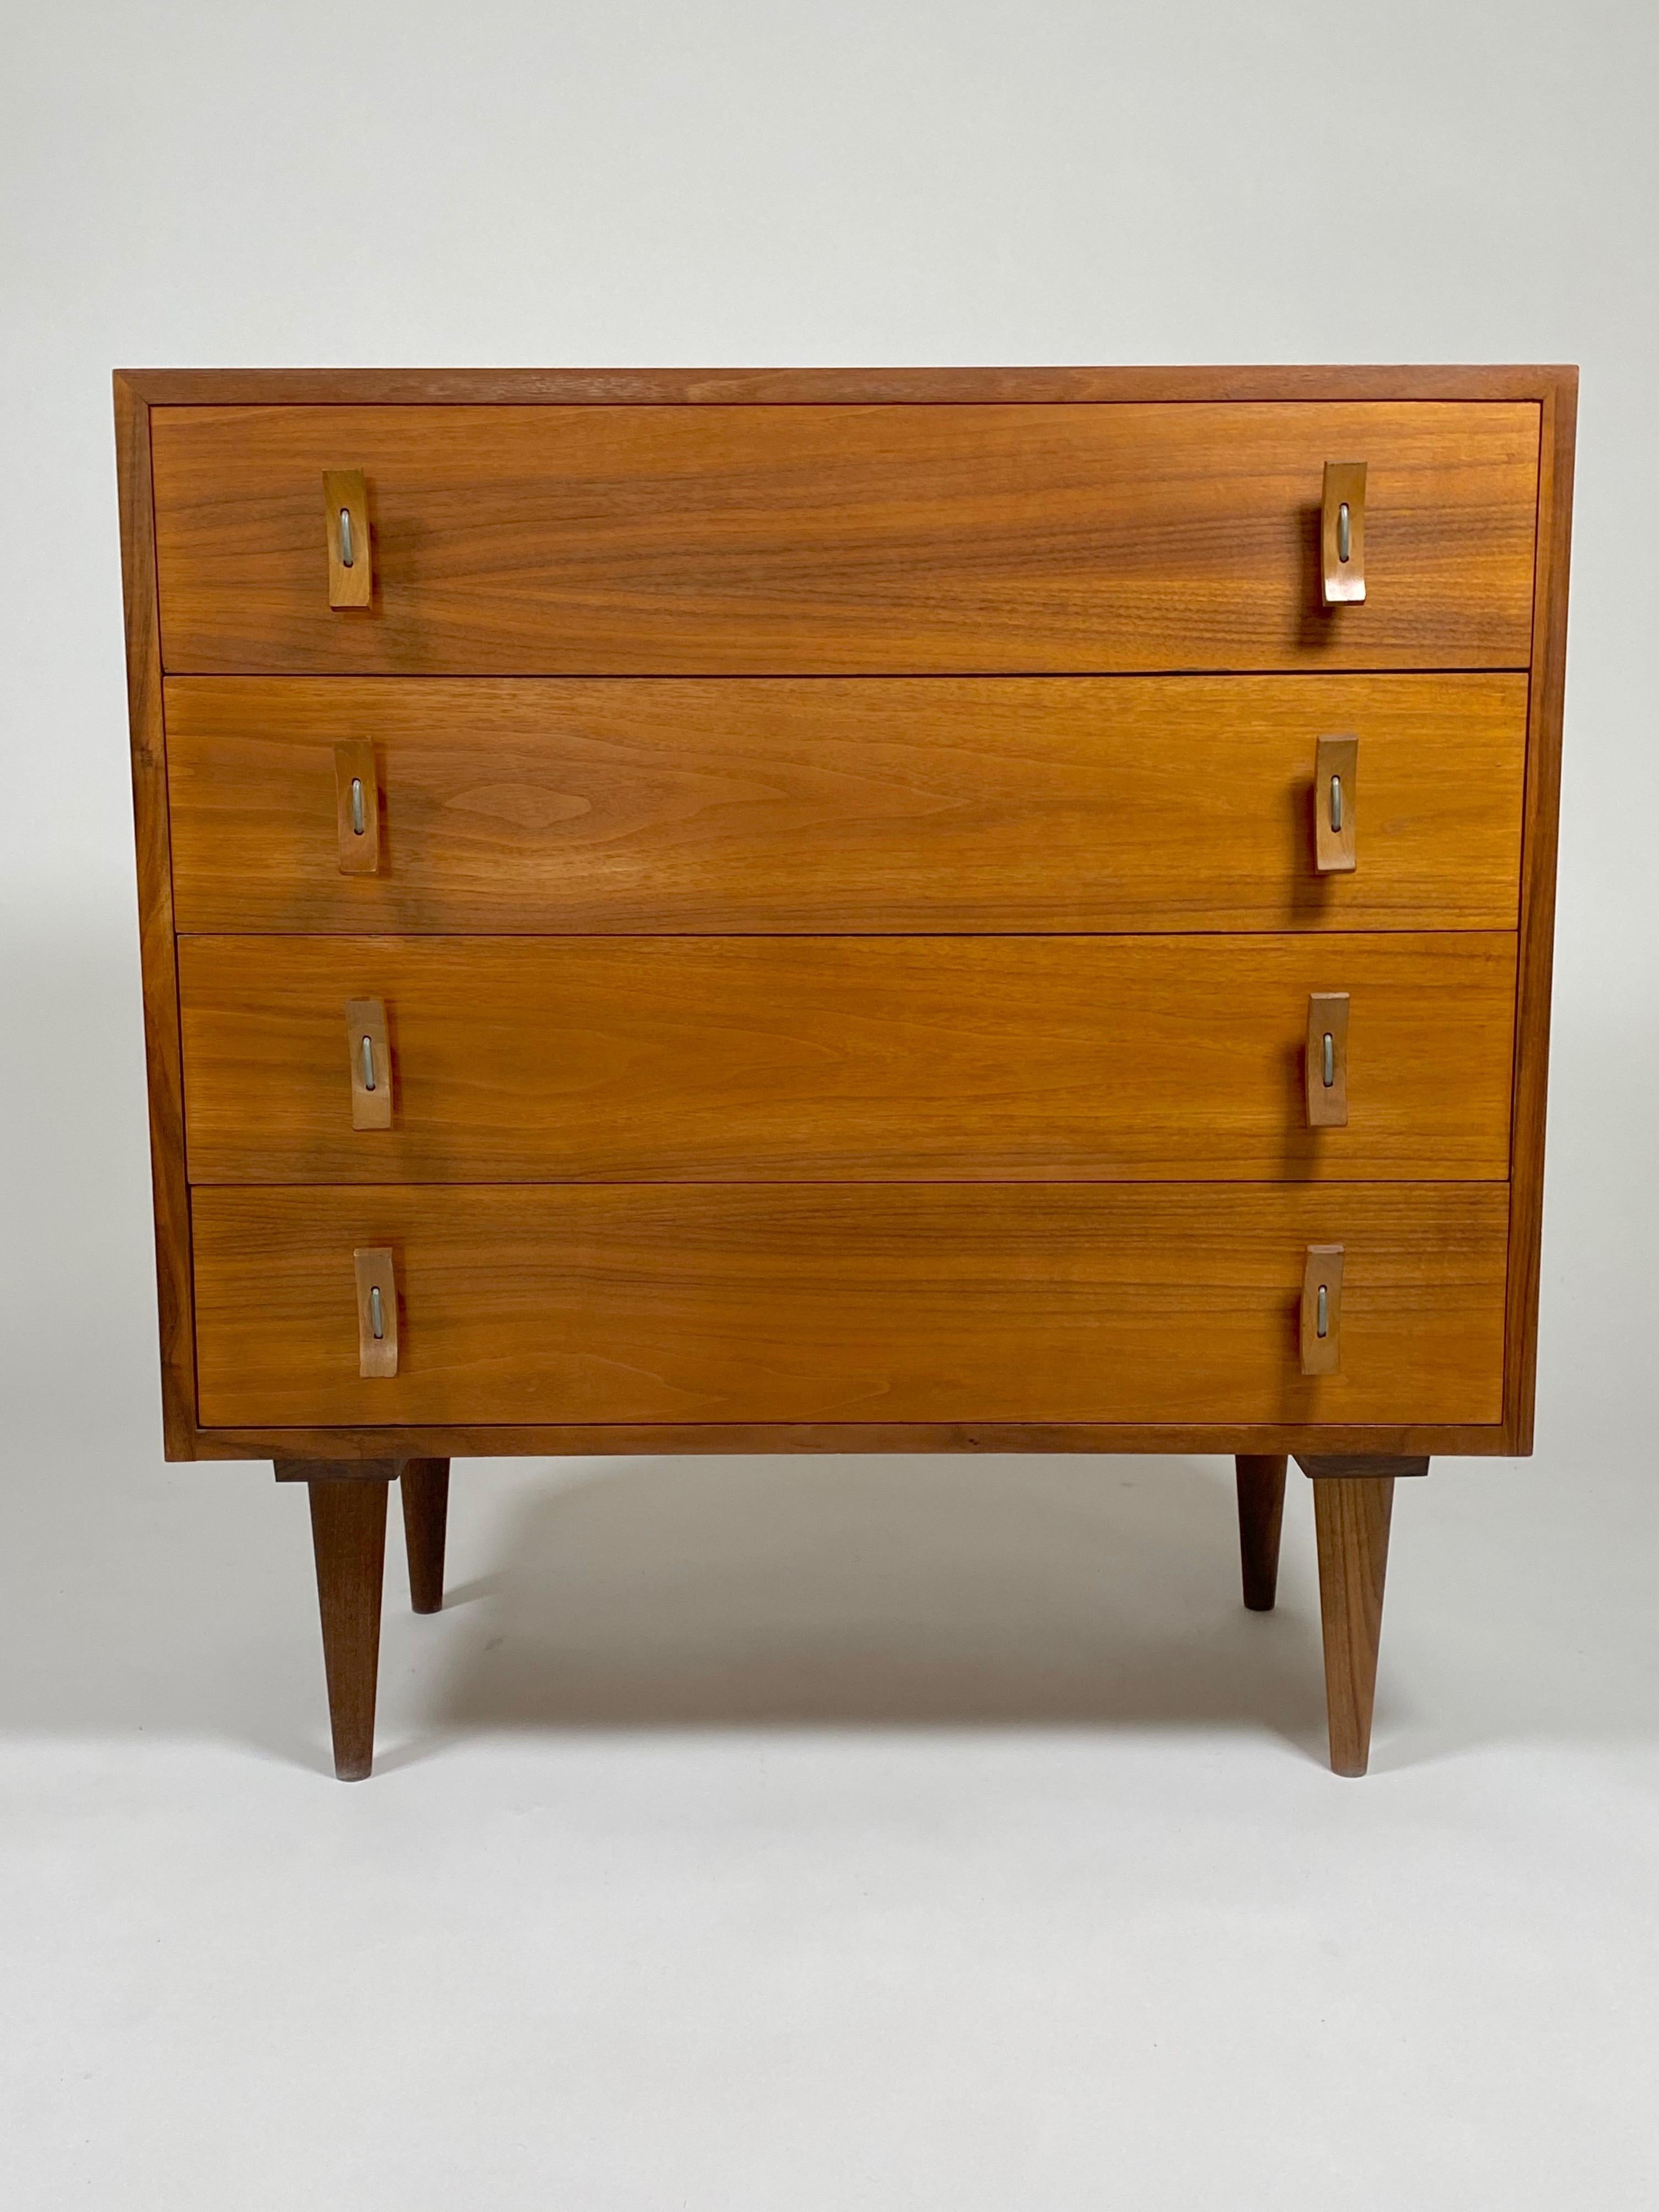 Post War Design compact four drawer dresser in California walnut by designer Stanley Young for Glenn of California. Curved wooden pulls held in place by cuvred aluminum fasteners. Resting on tapered dowel legs, the cabinet is richly colored and